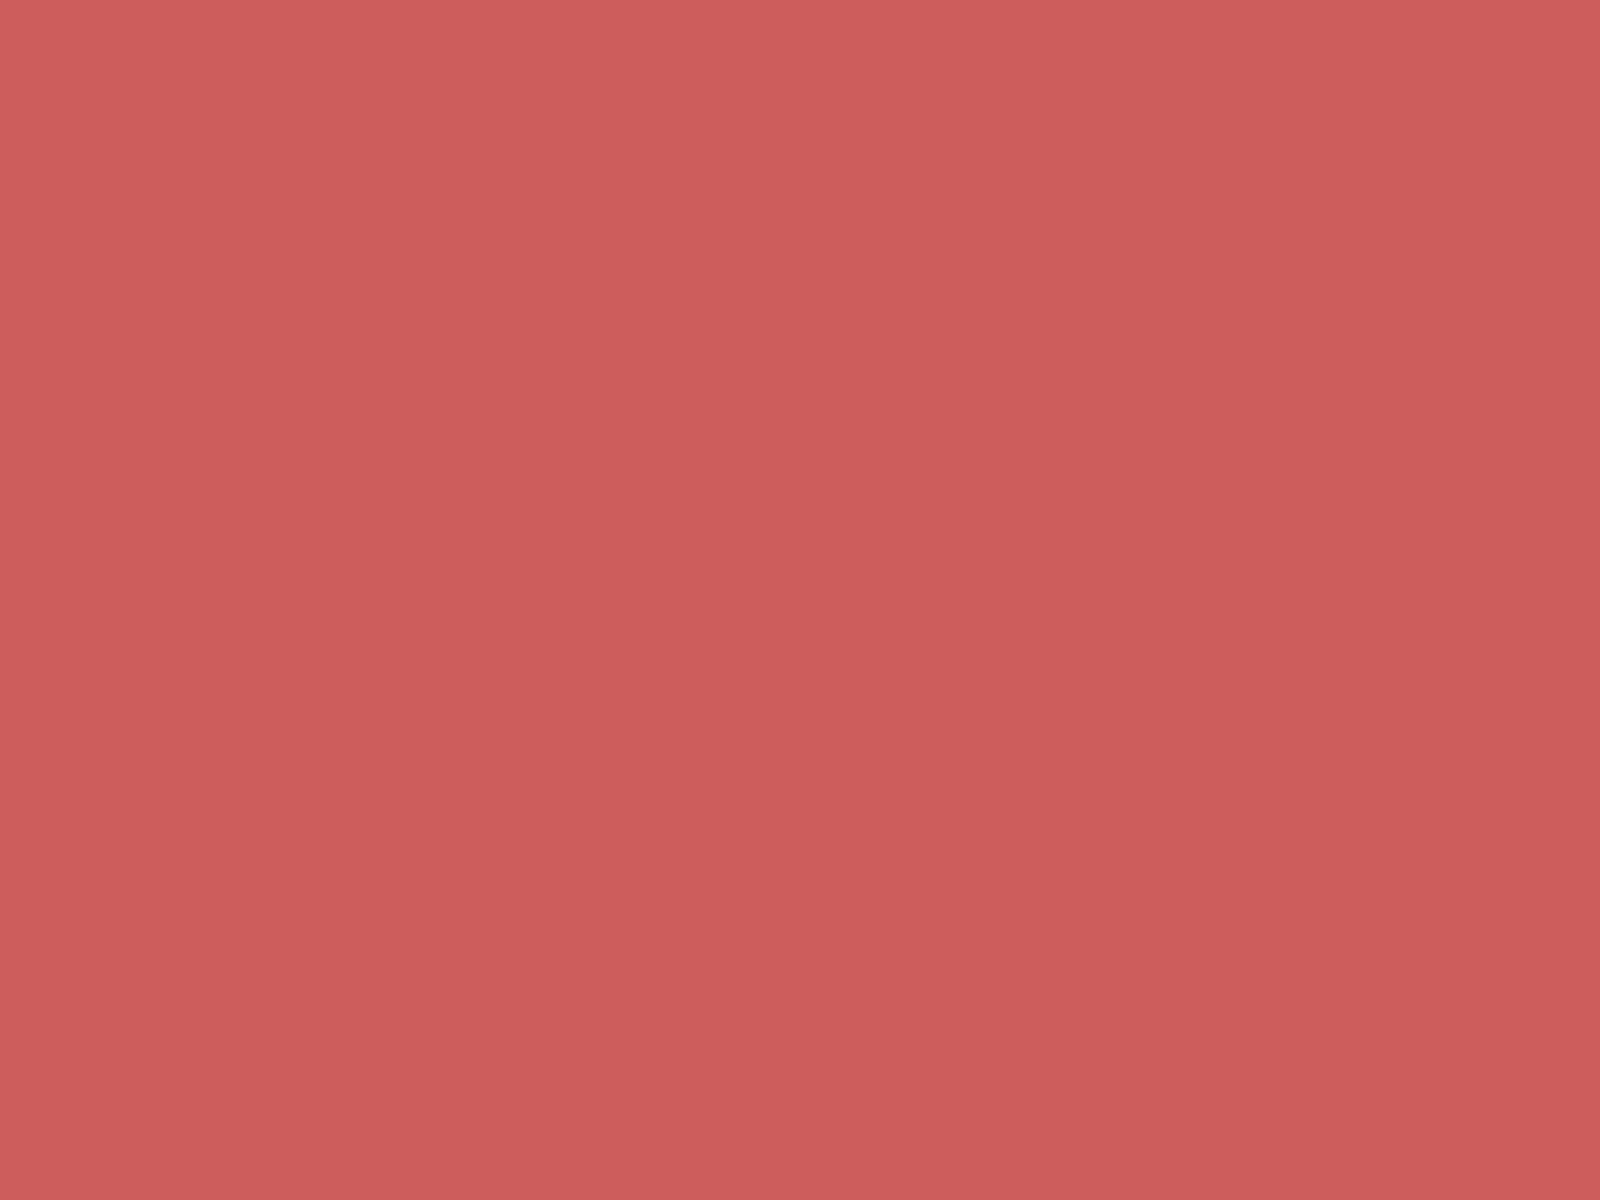 1600x1200 Indian Red Solid Color Background